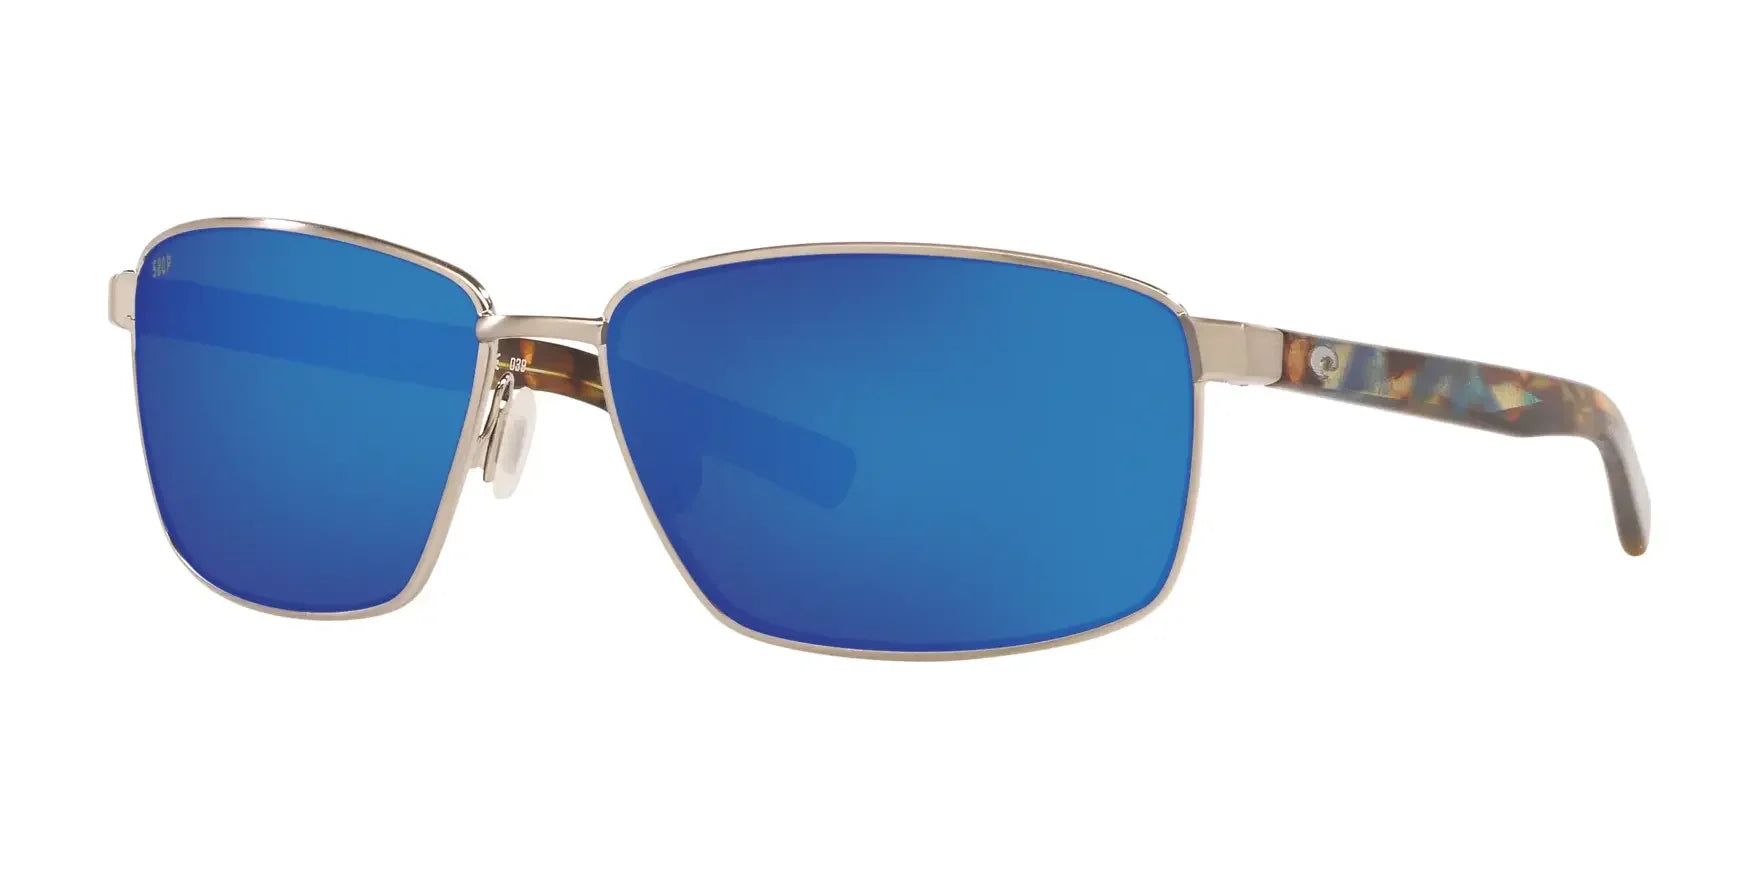 Costa PONCE 6S4008 Sunglasses Brushed Silver / Blue Mirror